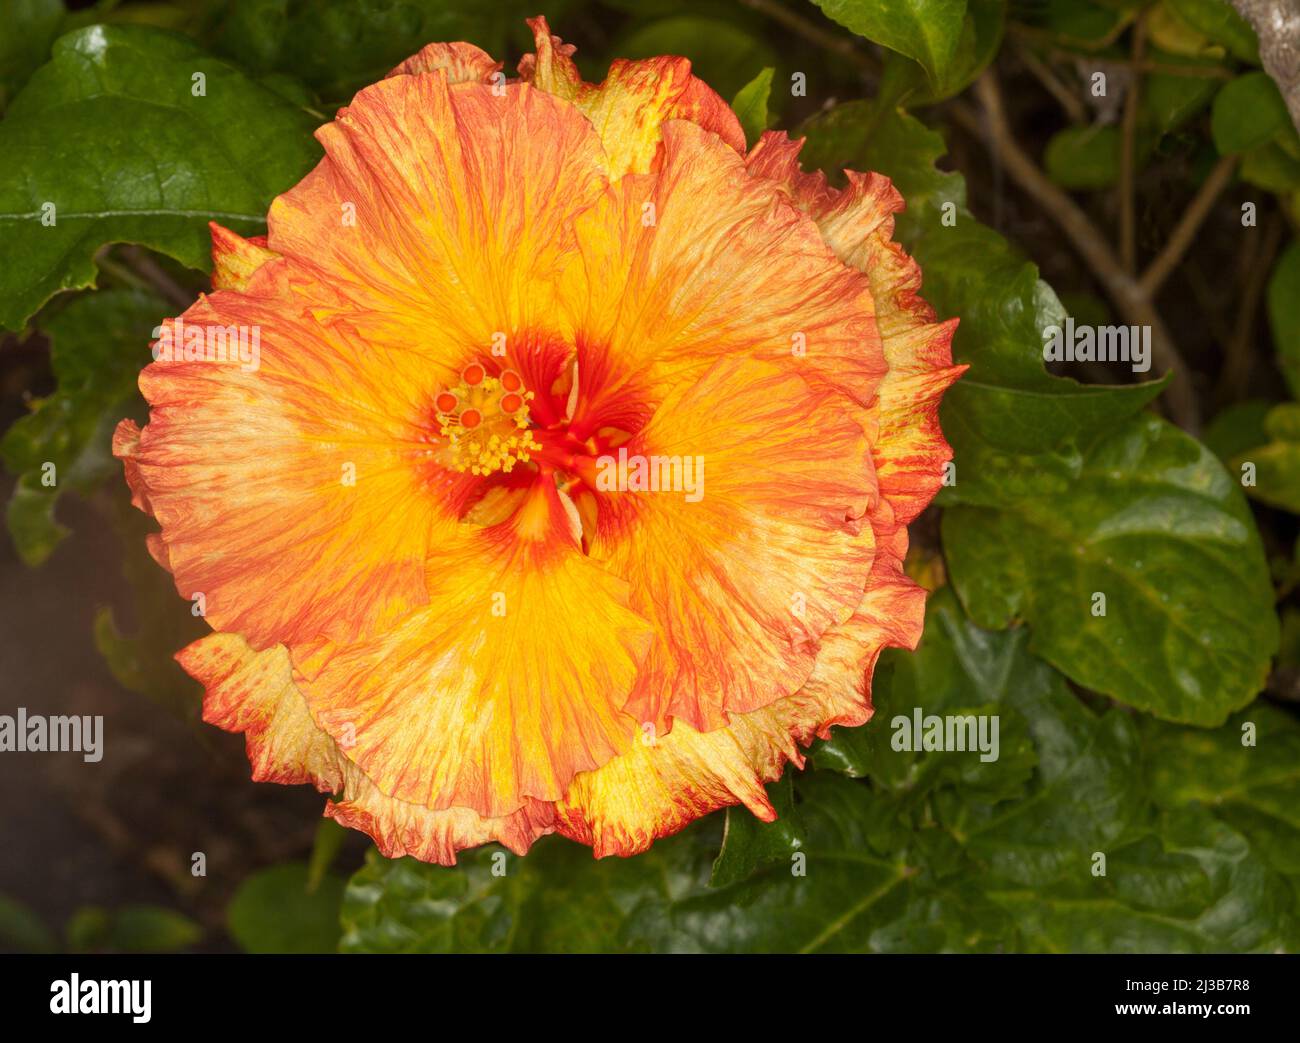 Spectacular vivid double orange flower with ruffled edges of petals of Hibiscus rosa-sinensis cultivar on background of dark green leaves Stock Photo